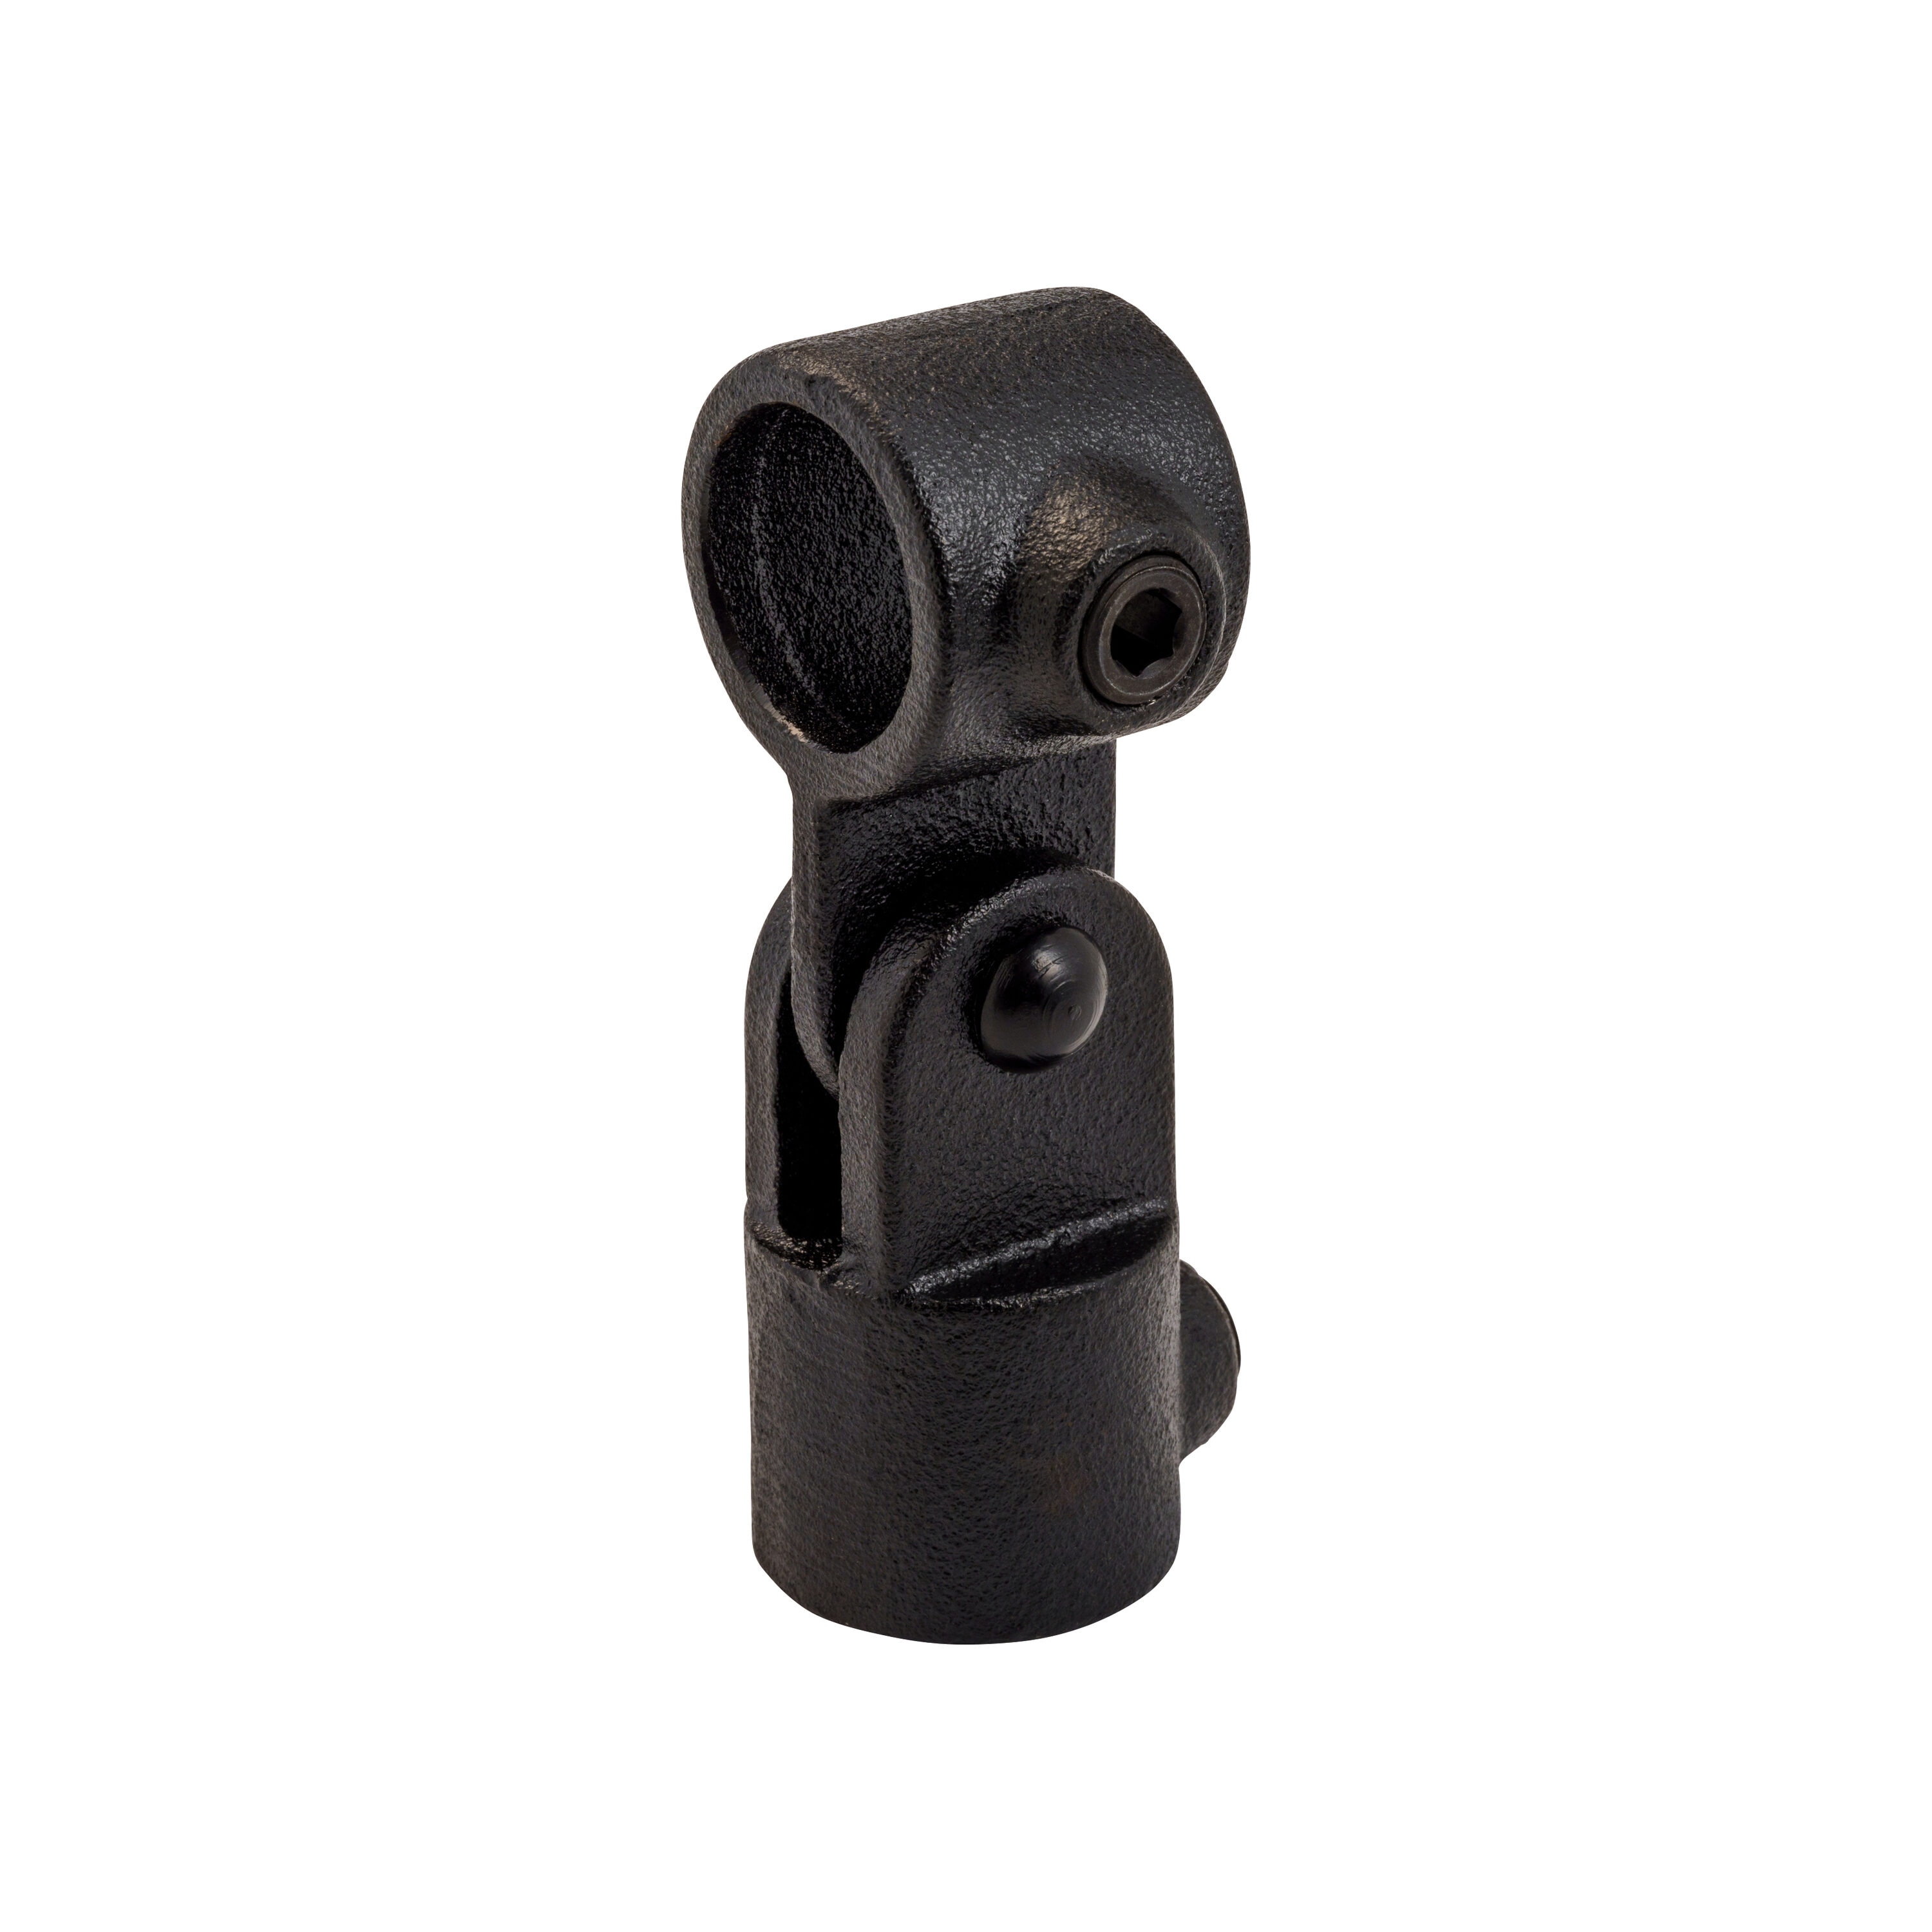 Swivel socket Structural Pipe & Fittings at